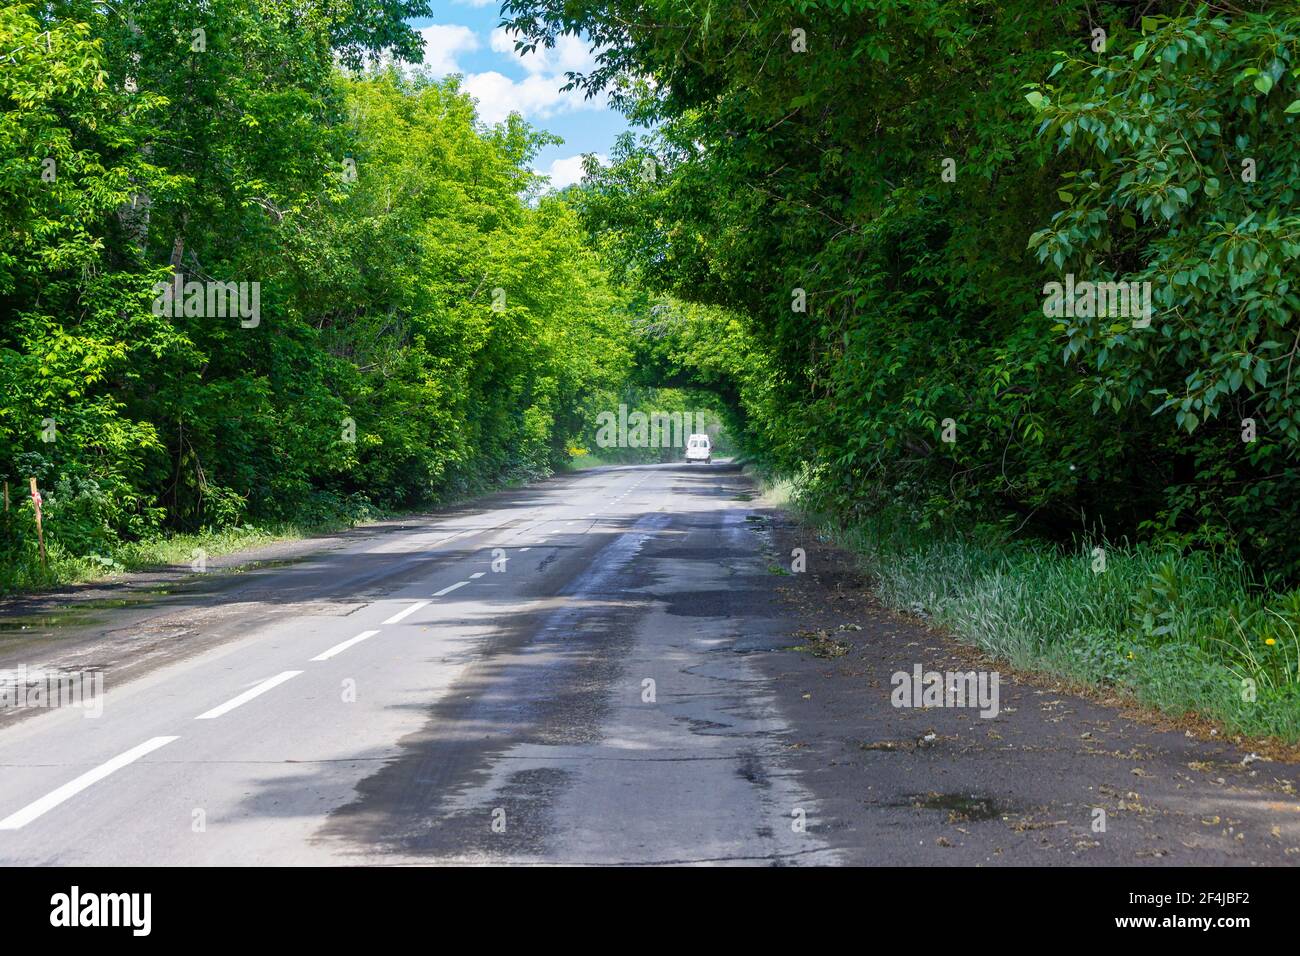 on a wet asphalt road, passing through the forest forming mysterious green arches from the branches, a white minibus is driving into the distance Stock Photo